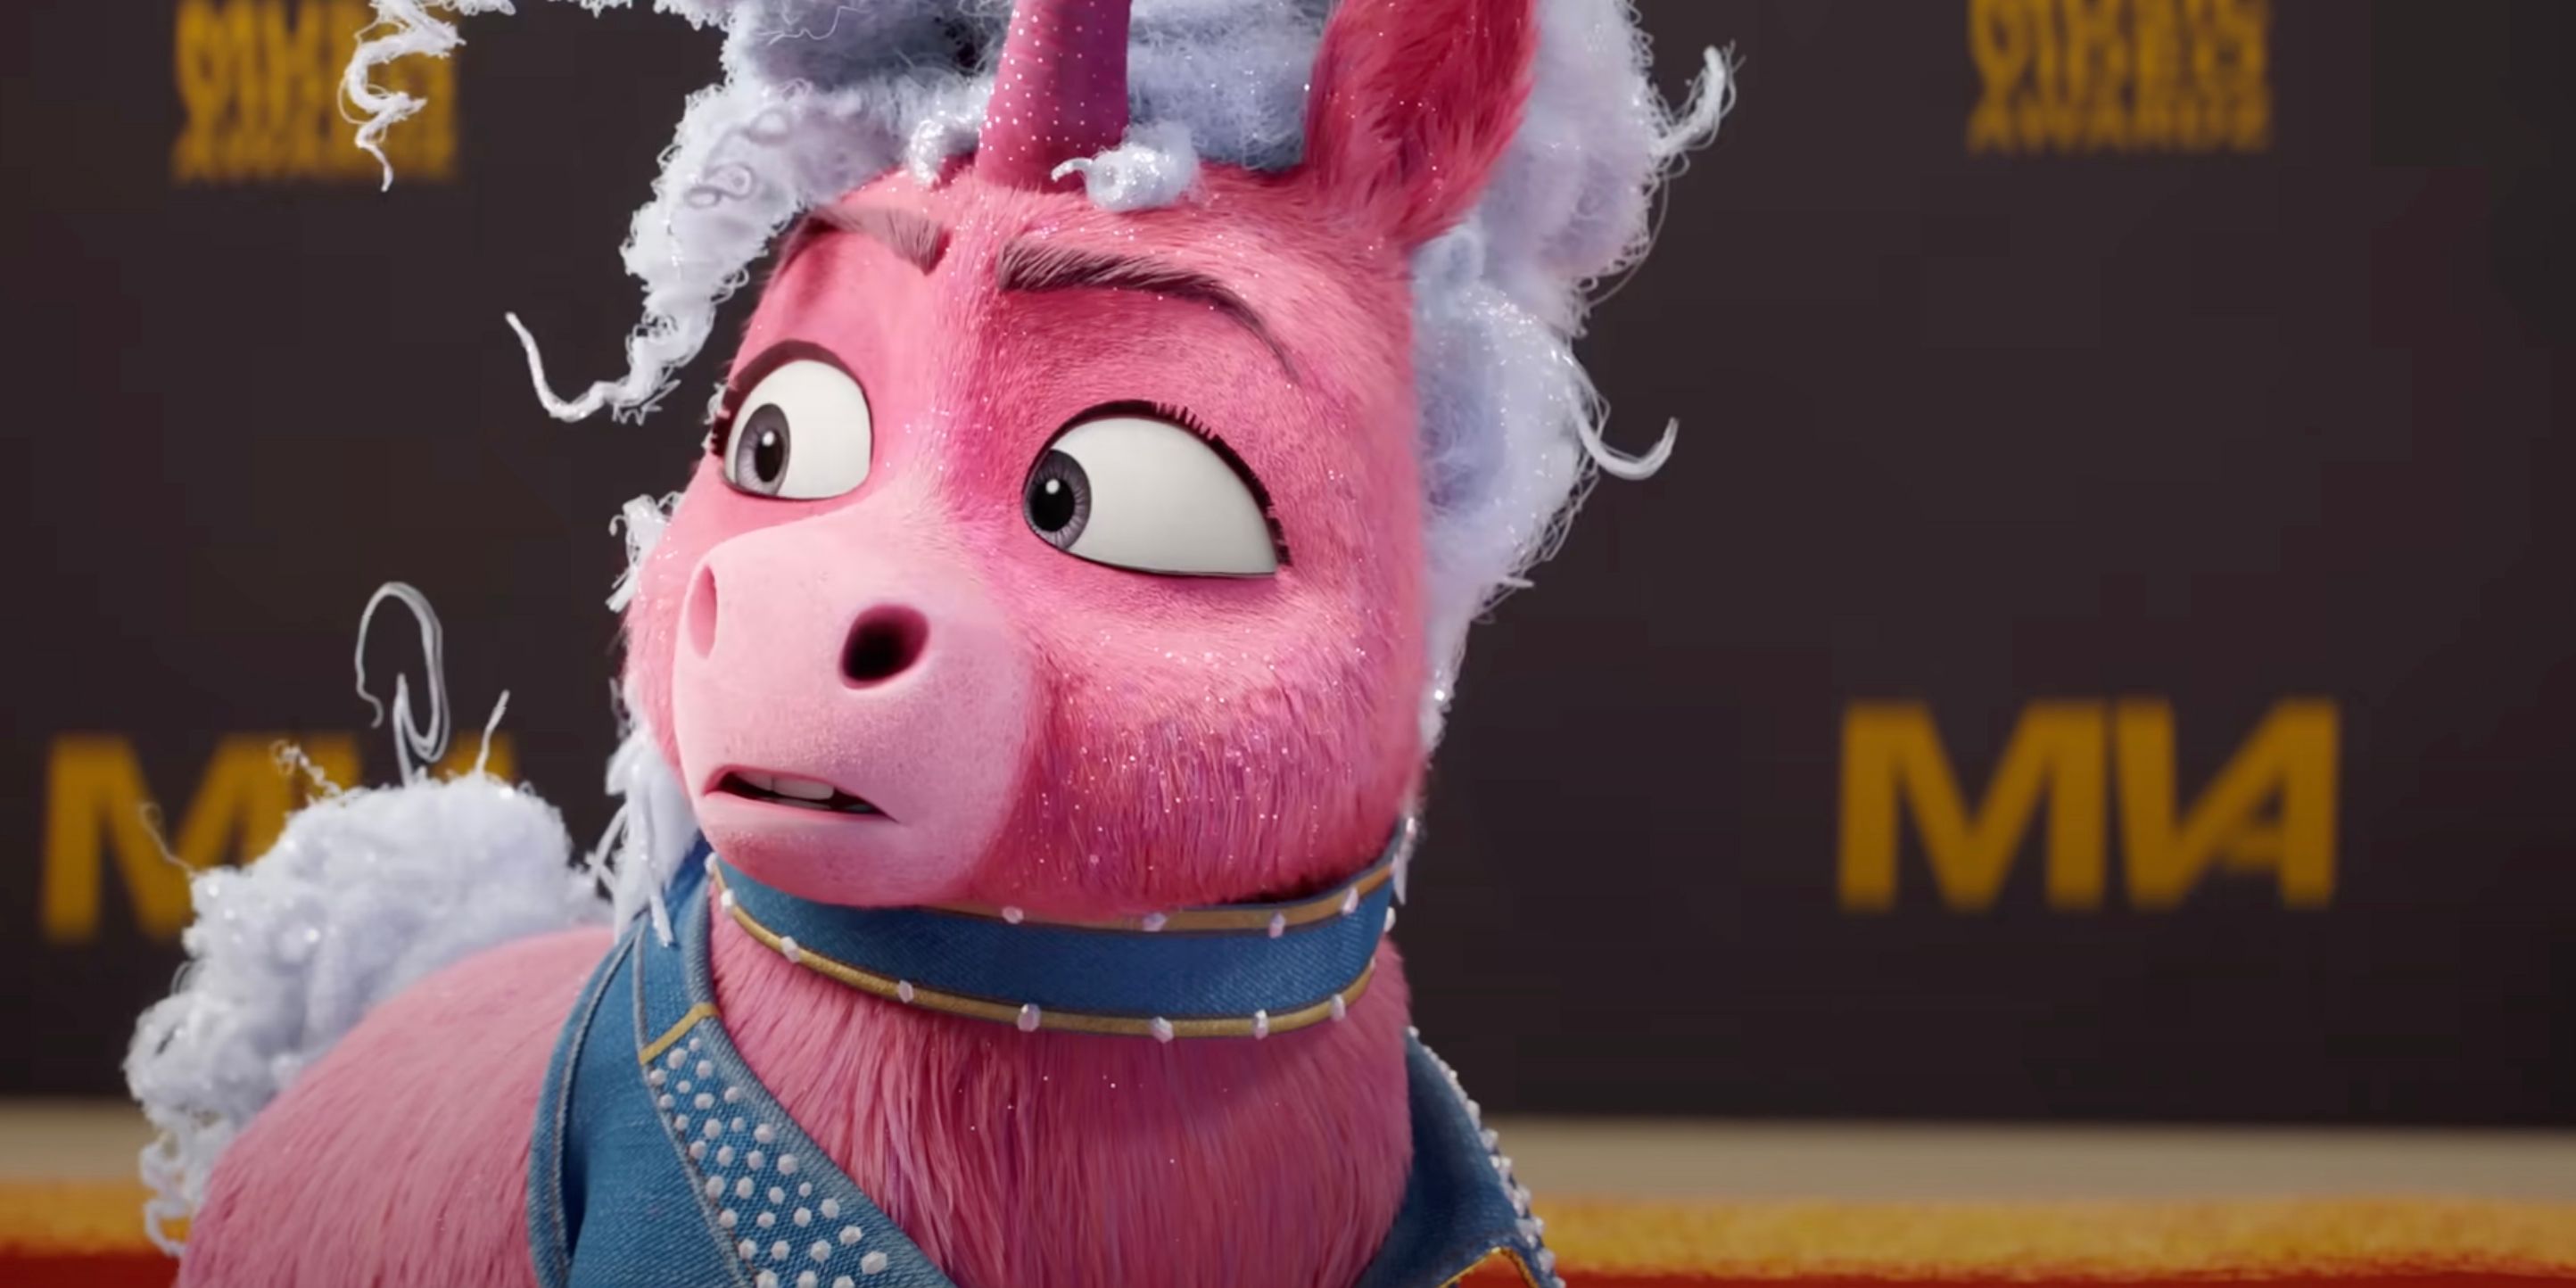 Thelma looking confused in the Thelma the Unicorn trailer.